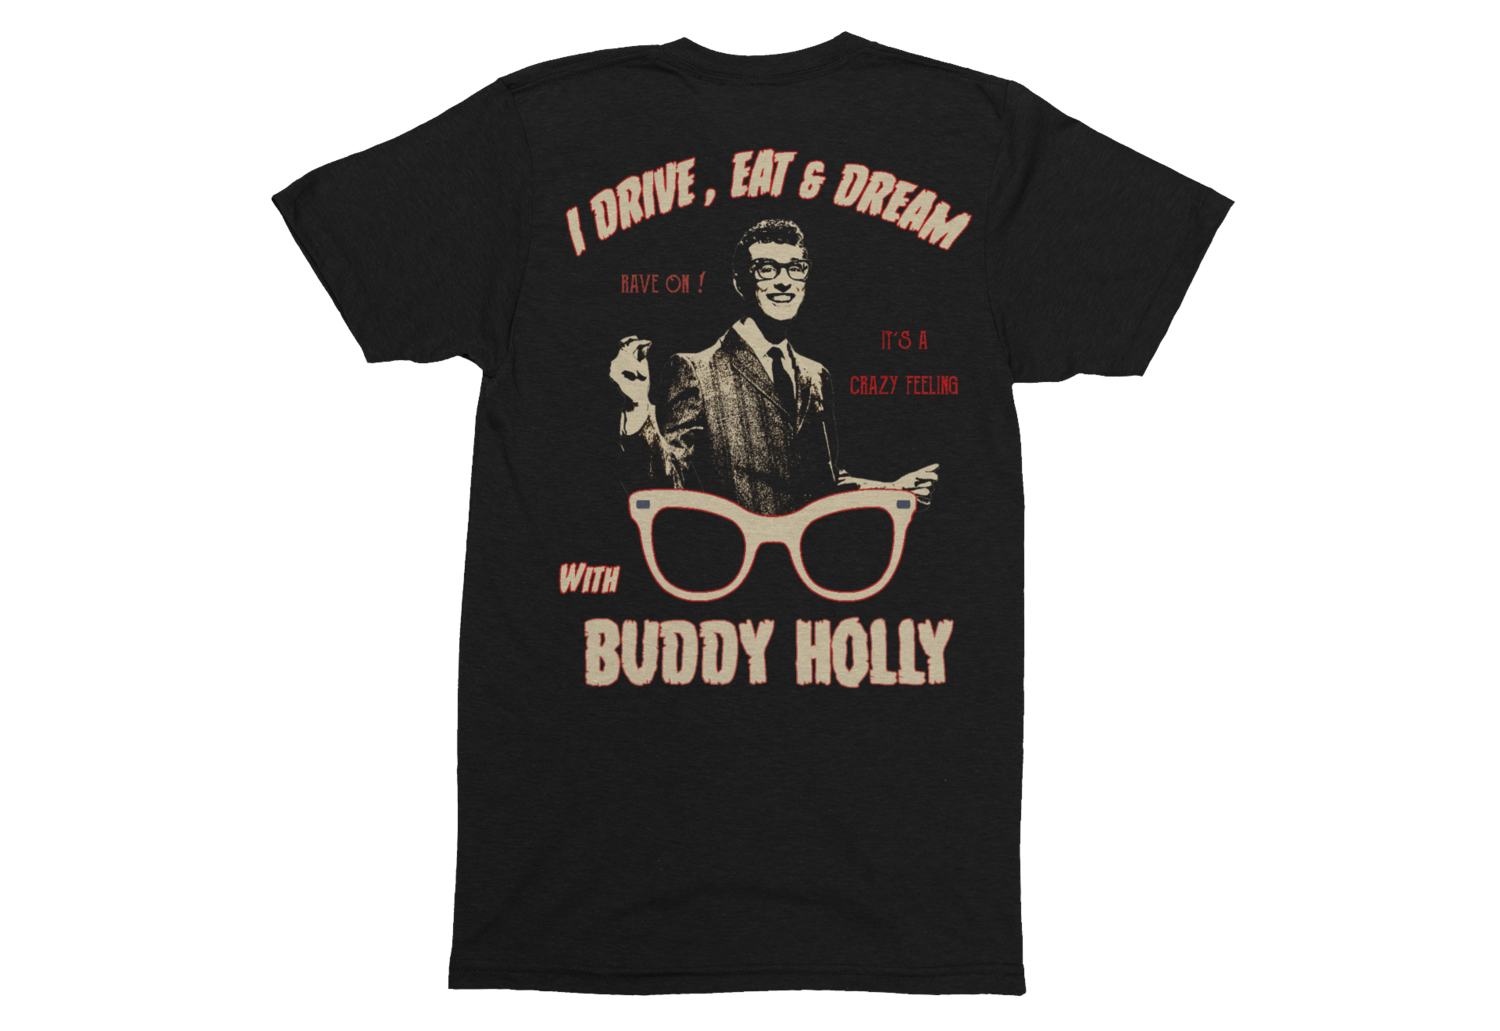 BUDDY HOLLY RULES T-SHIRT FOR MEN